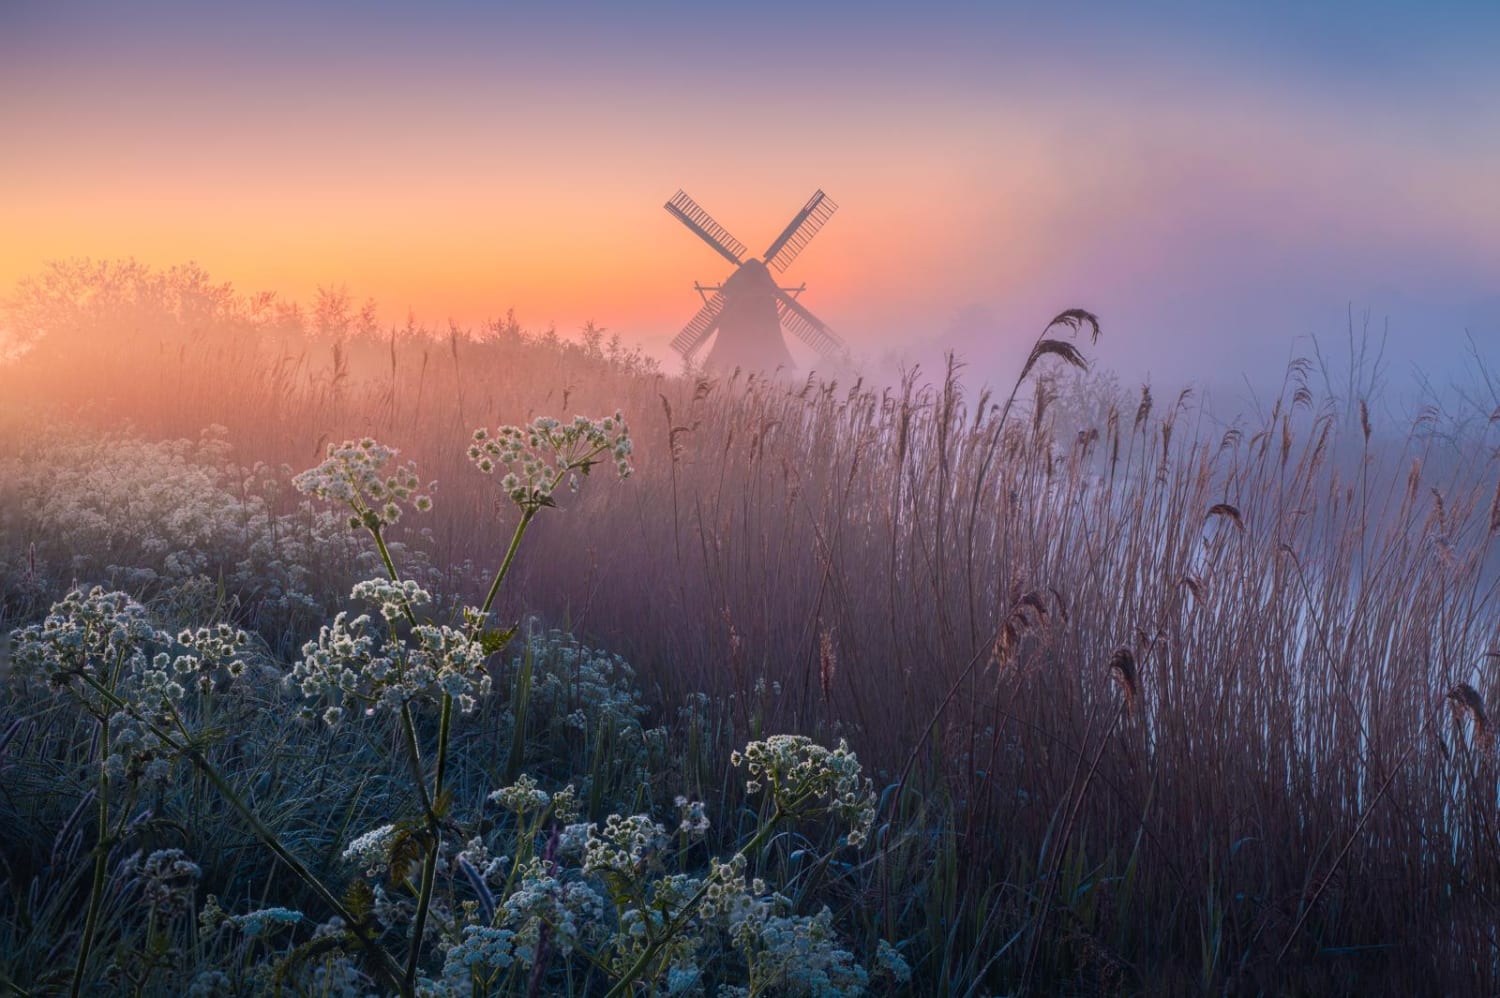 Windmill in the early morning fog